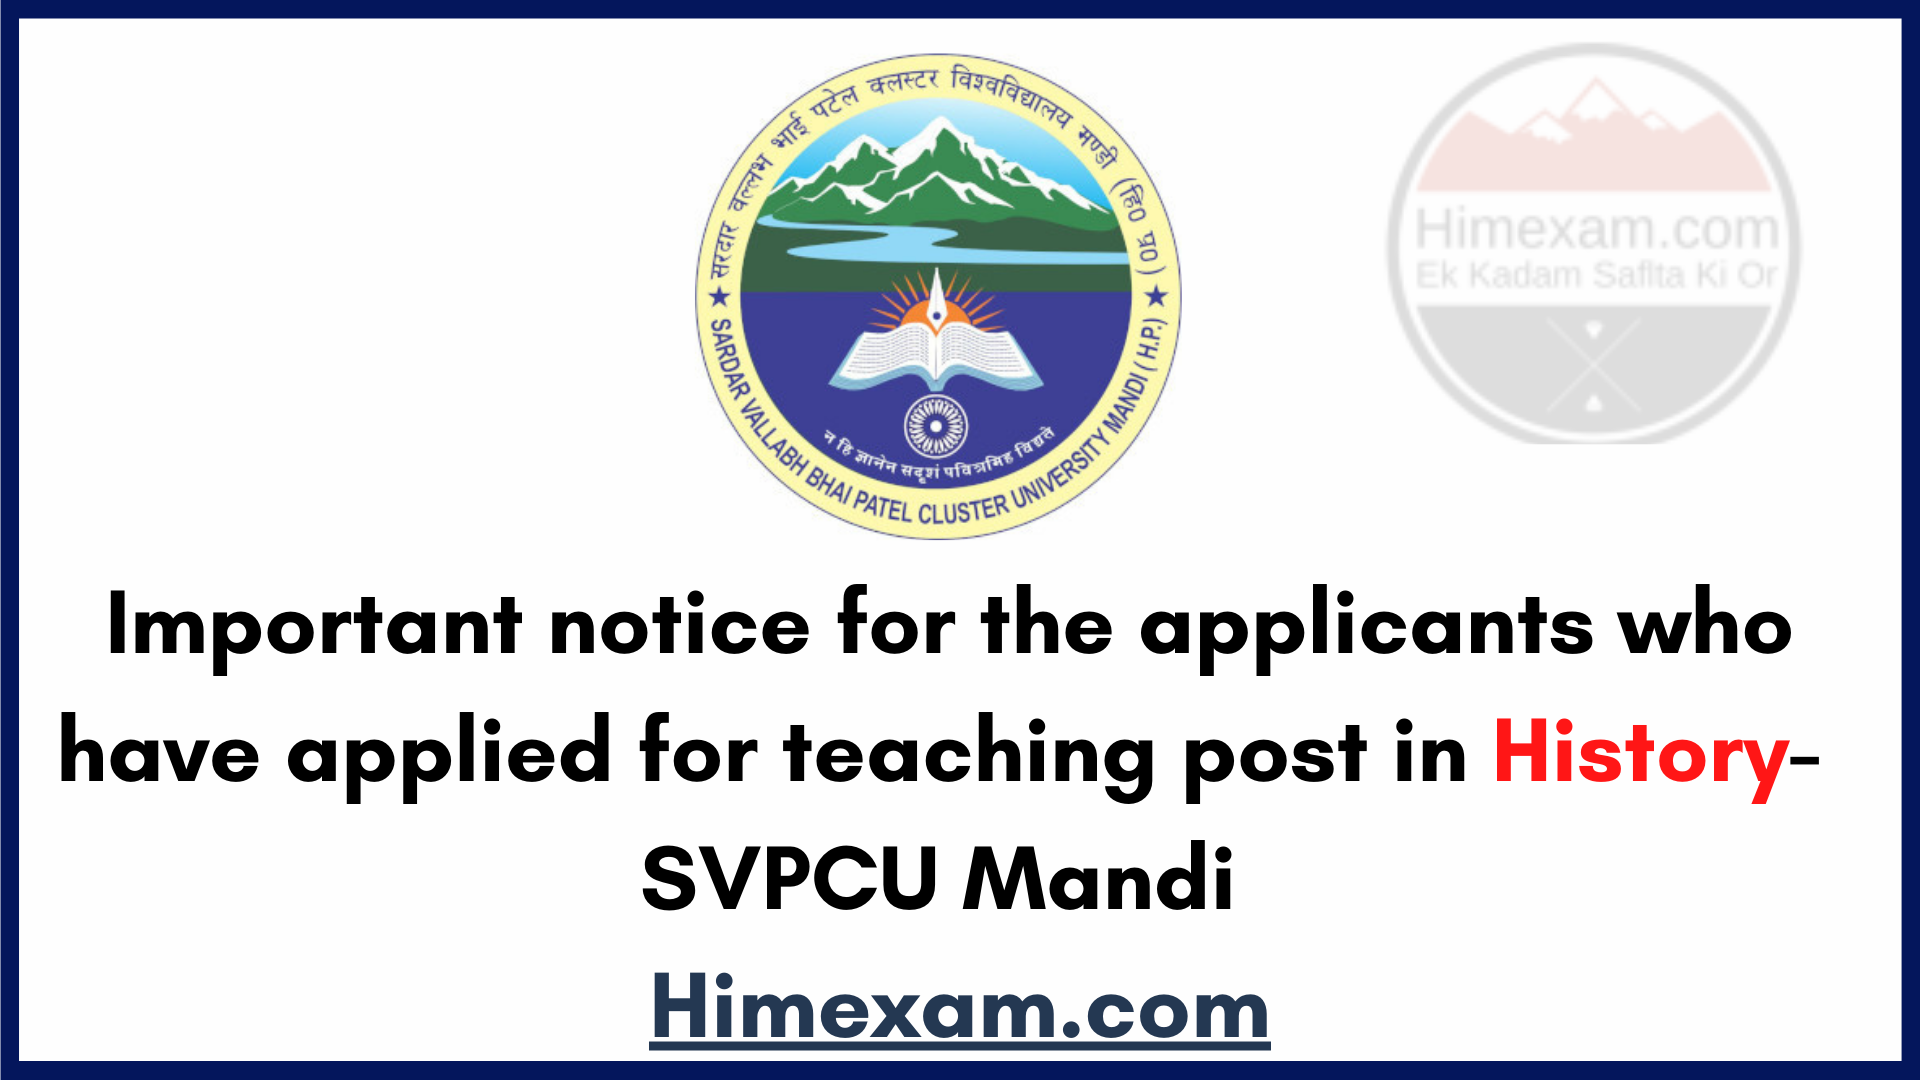 Important notice for the applicants who have applied for teaching post in History-SVPCU Mandi